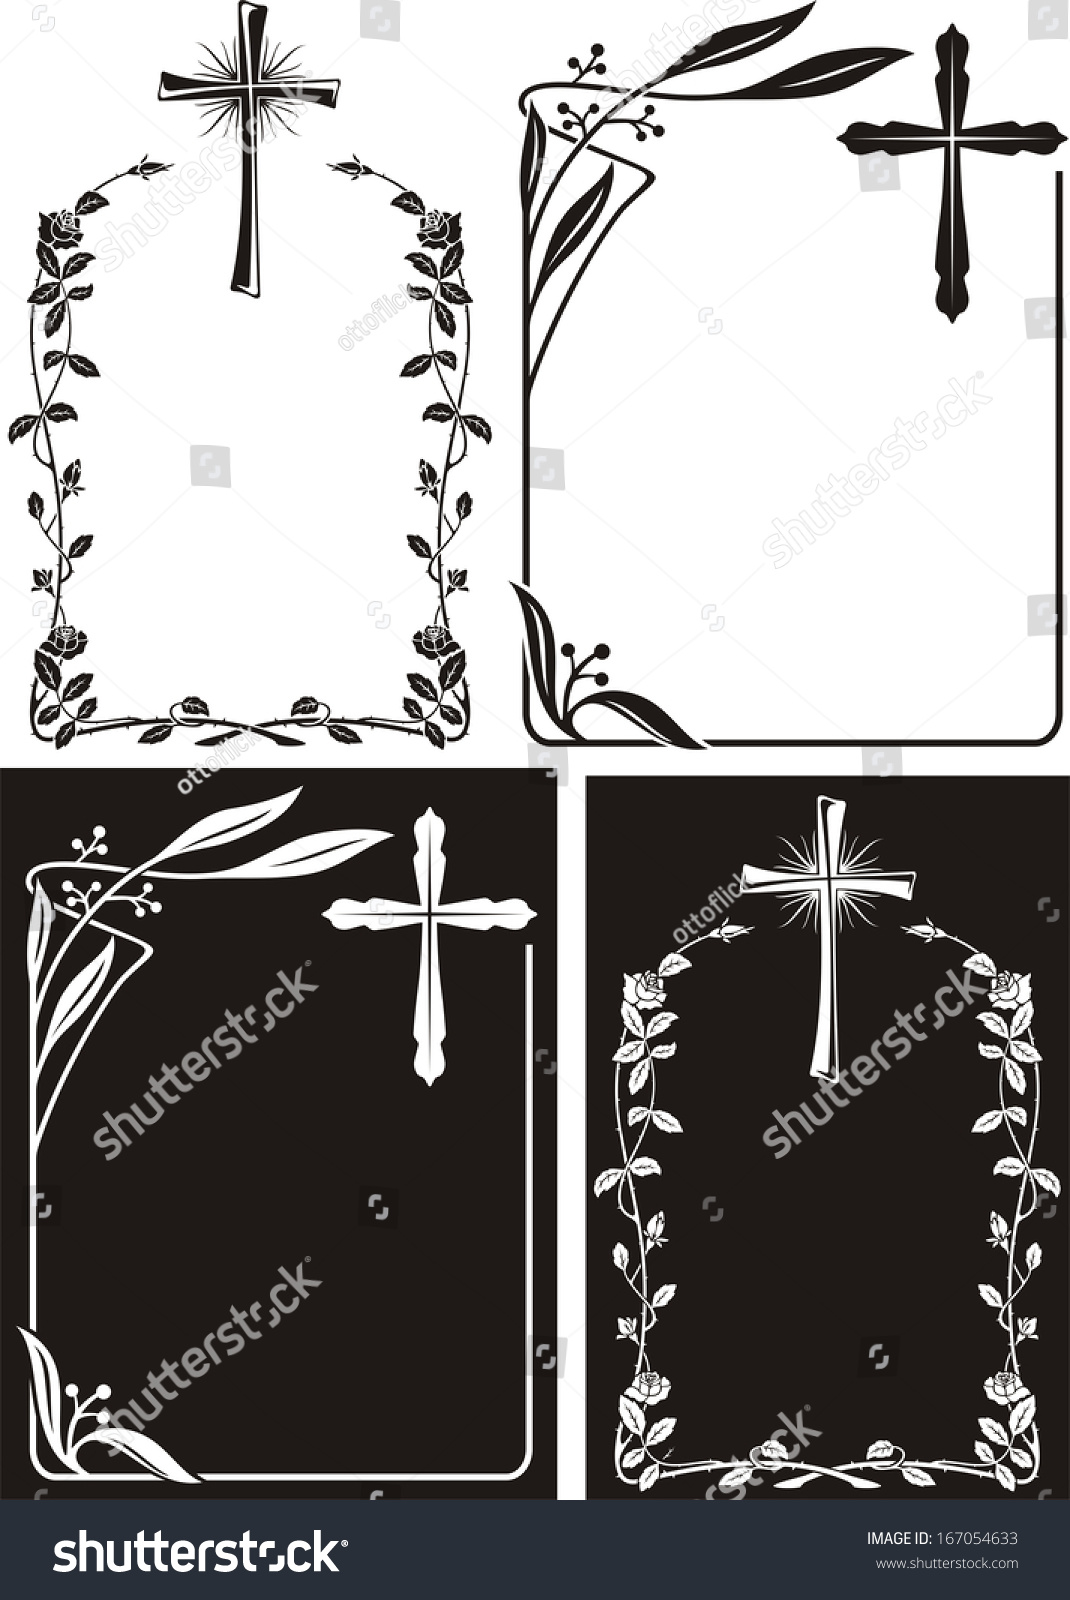 Memorial Plaque Or Obituary Notice Black And Royalty Free Stock Vector 167054633